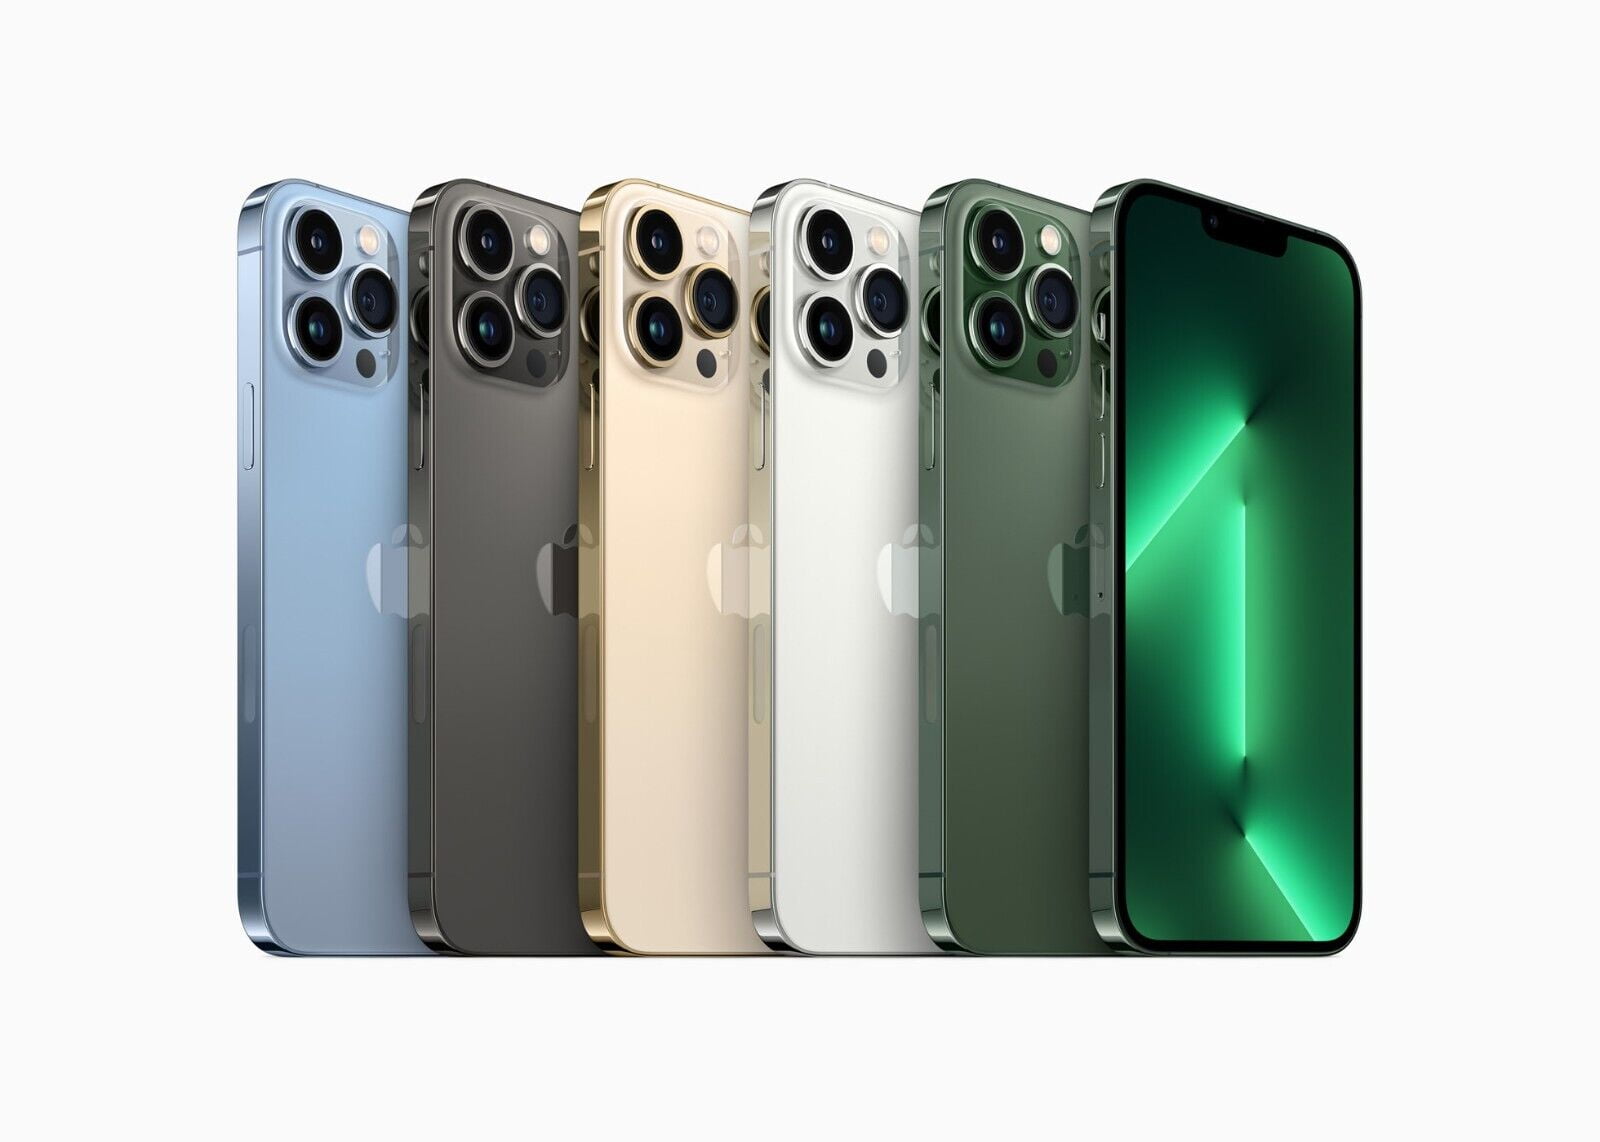 Apple iPhone 13 Pro Max 128GB 256GB 512GB 1024GB All Colors - Factory  Unlocked Cell Phones - Very Good Condition - Refurbished